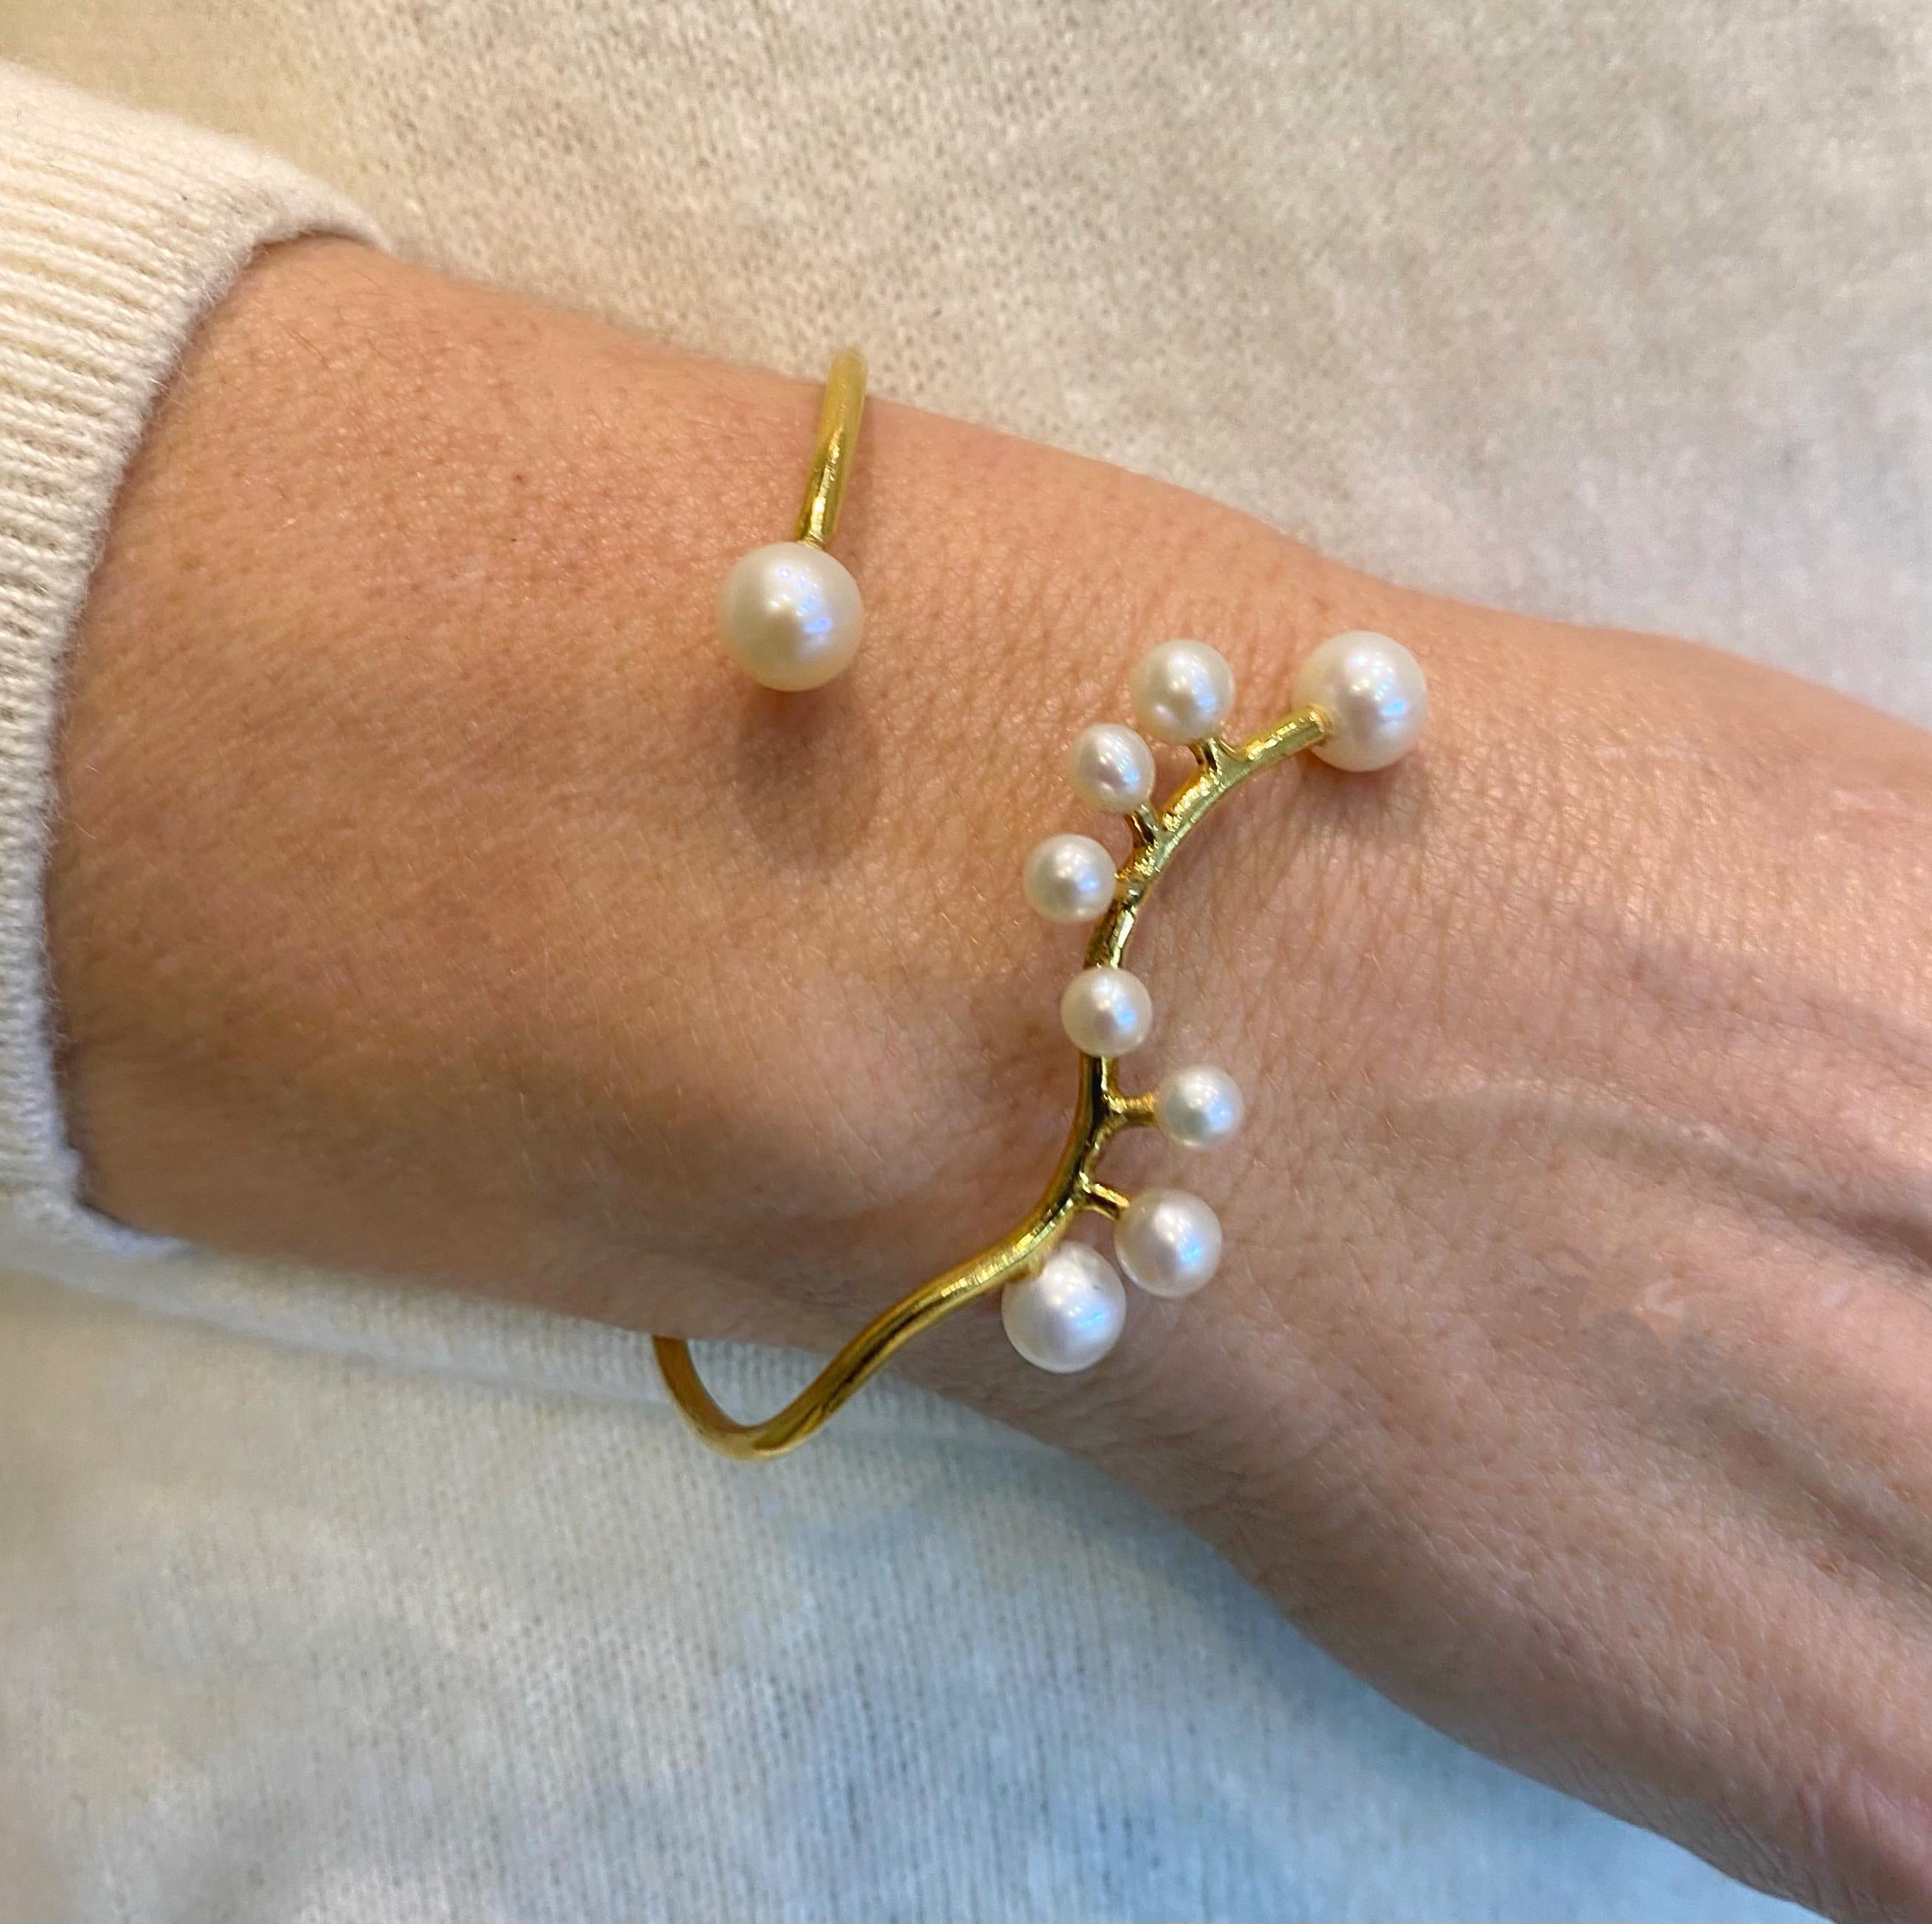 From the “Ivy Pearl “collection this amazing bracelet is made in 18 karats yellow gold embellished with white pearls. The collection emulates the intricacy of ground- creeping evergreen ivy plant, combined with the serene beauty of pearls. The